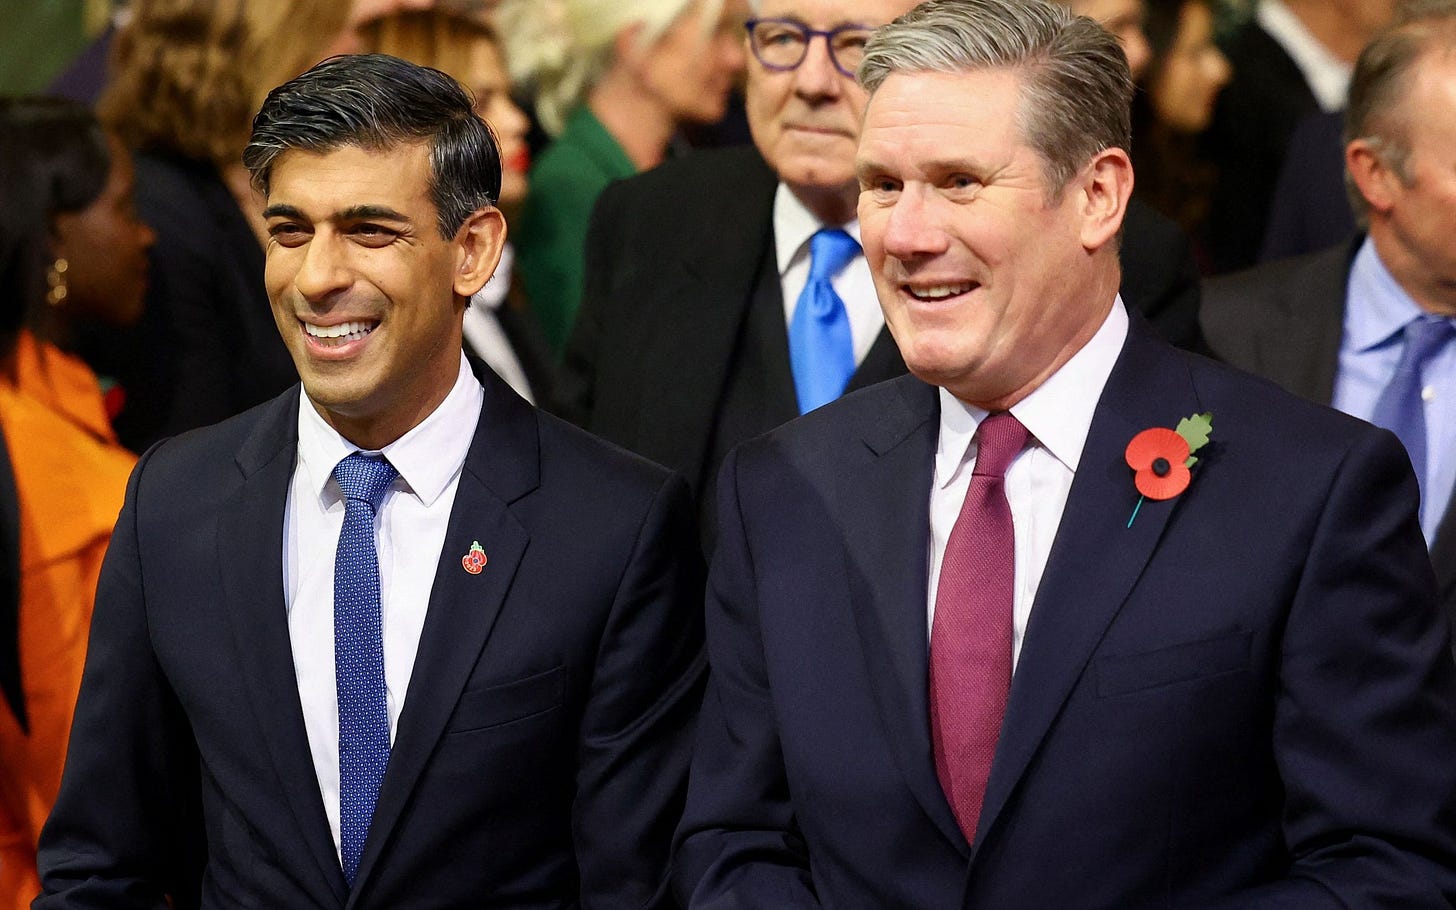 Keir Starmer is more popular than Rishi Sunak with the public, poll reveals